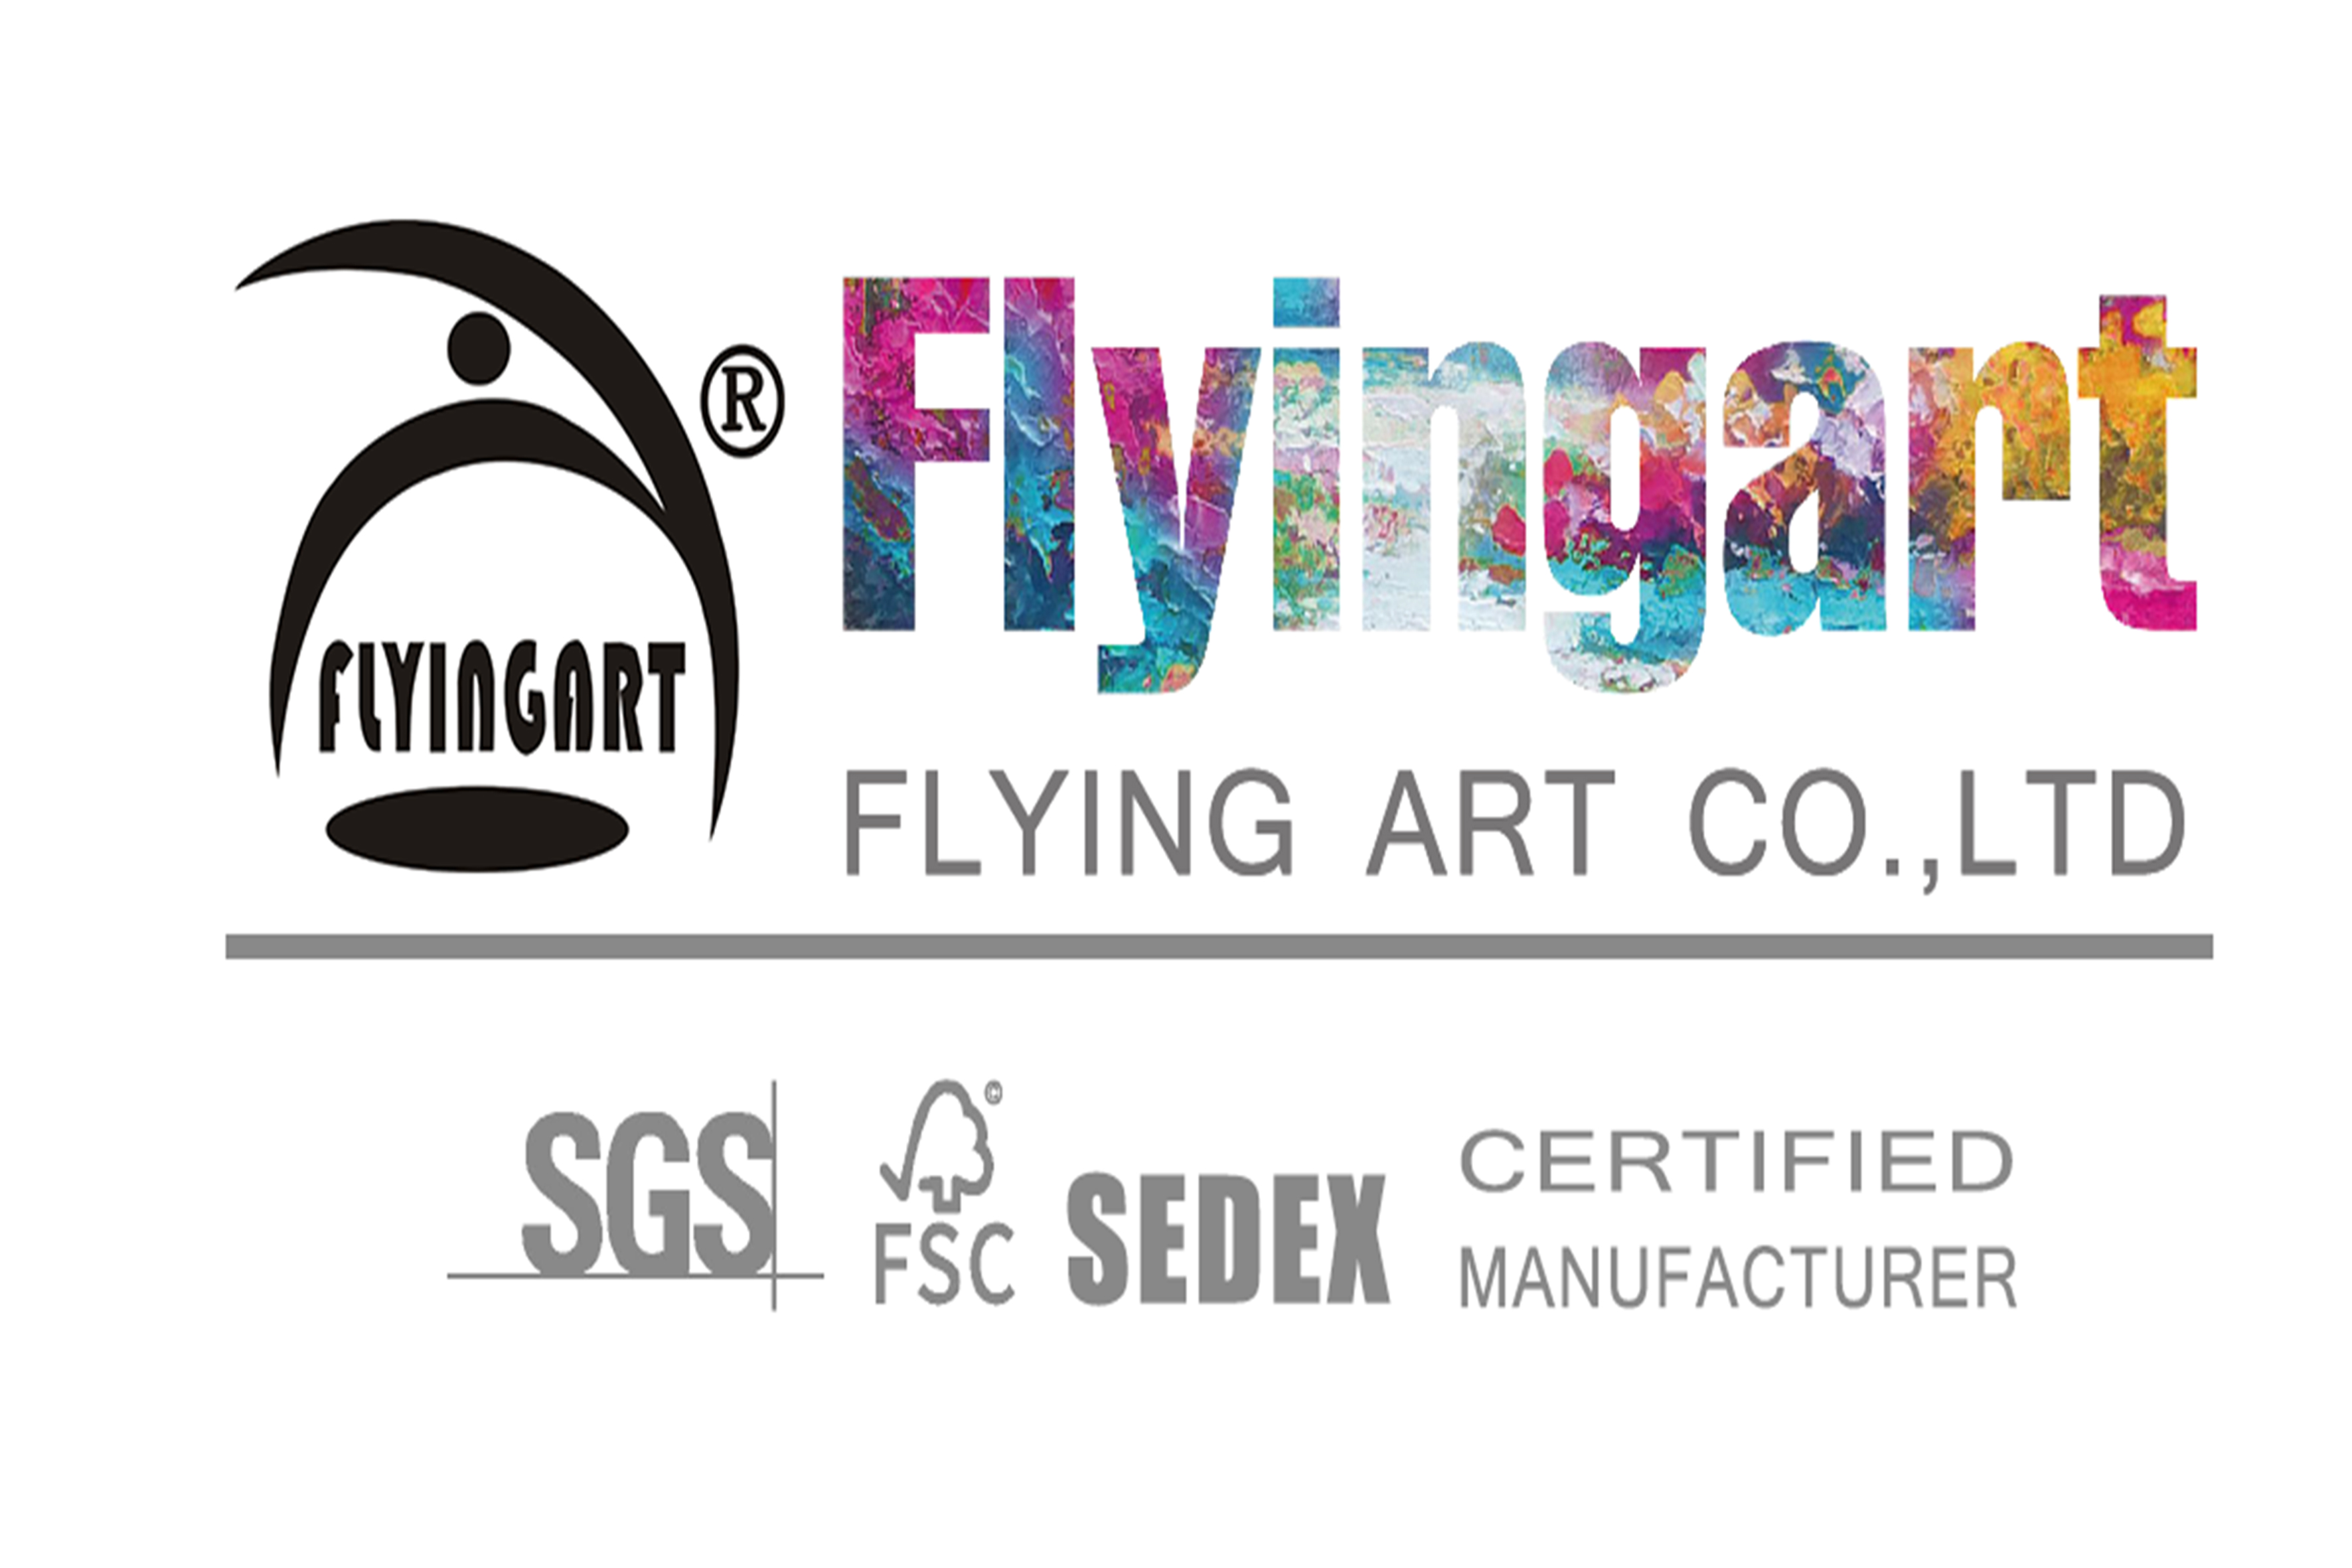 FLYING ART CO.LTMITED